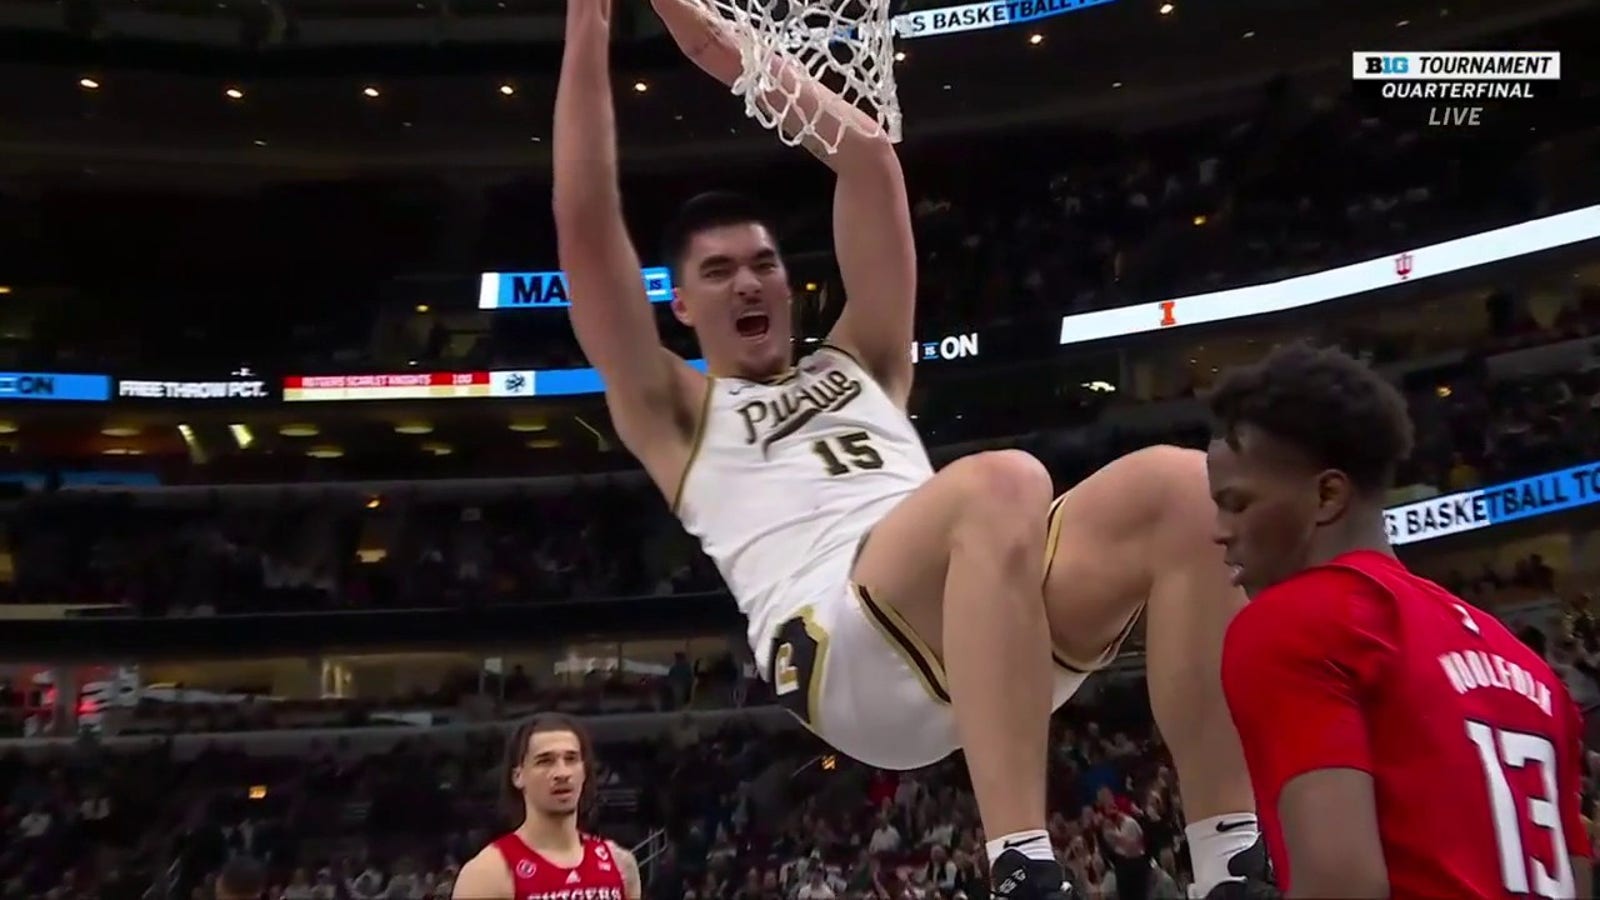 Purdue's Zach Edey delivers a HUGE two-handed teamfight against Rutgers